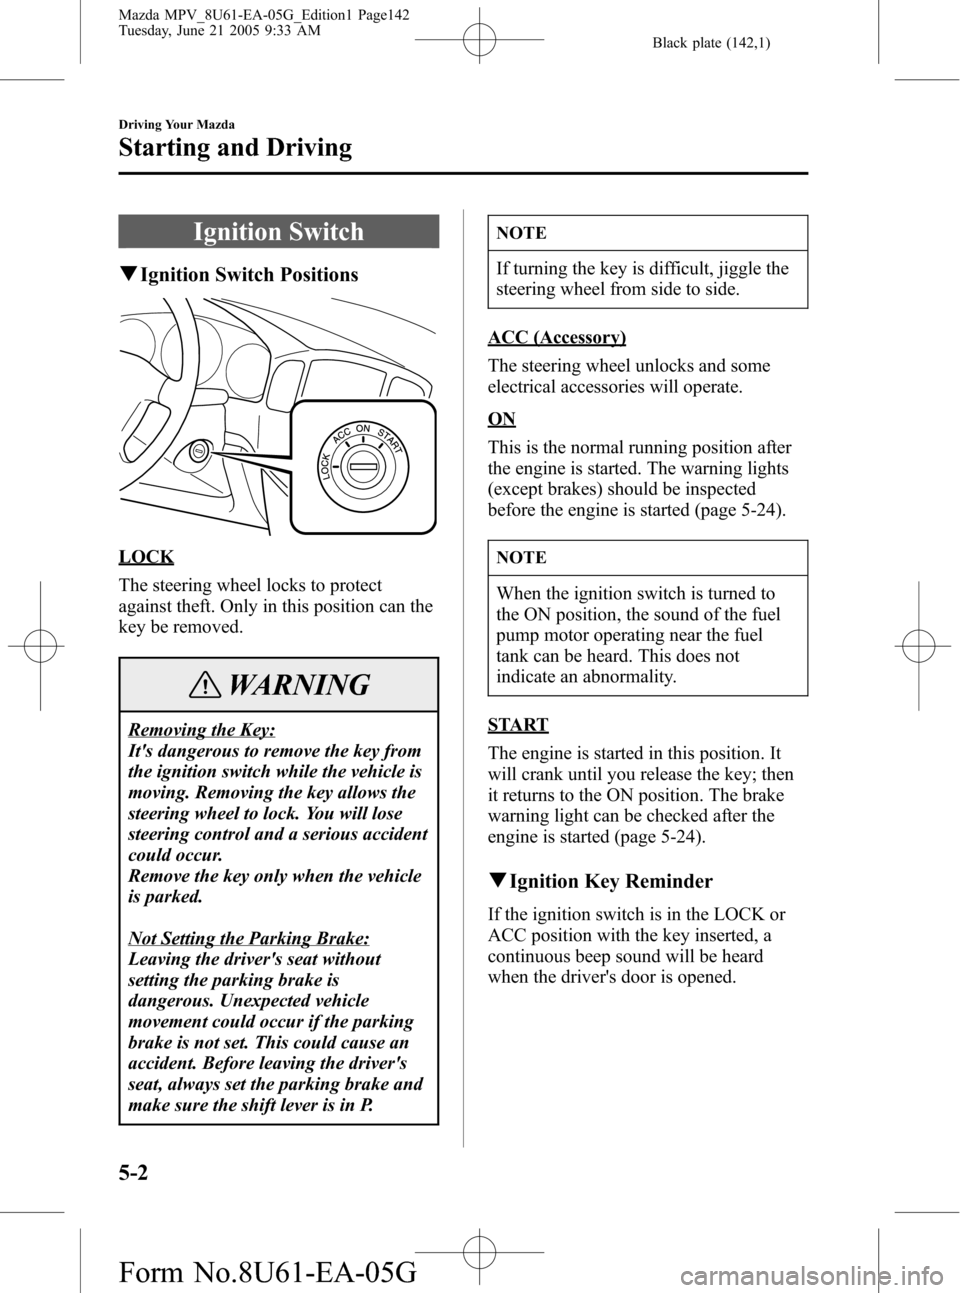 MAZDA MODEL MPV 2006  Owners Manual (in English) Black plate (142,1)
Ignition Switch
qIgnition Switch Positions
LOCK
The steering wheel locks to protect
against theft. Only in this position can the
key be removed.
WARNING
Removing the Key:
Its dang